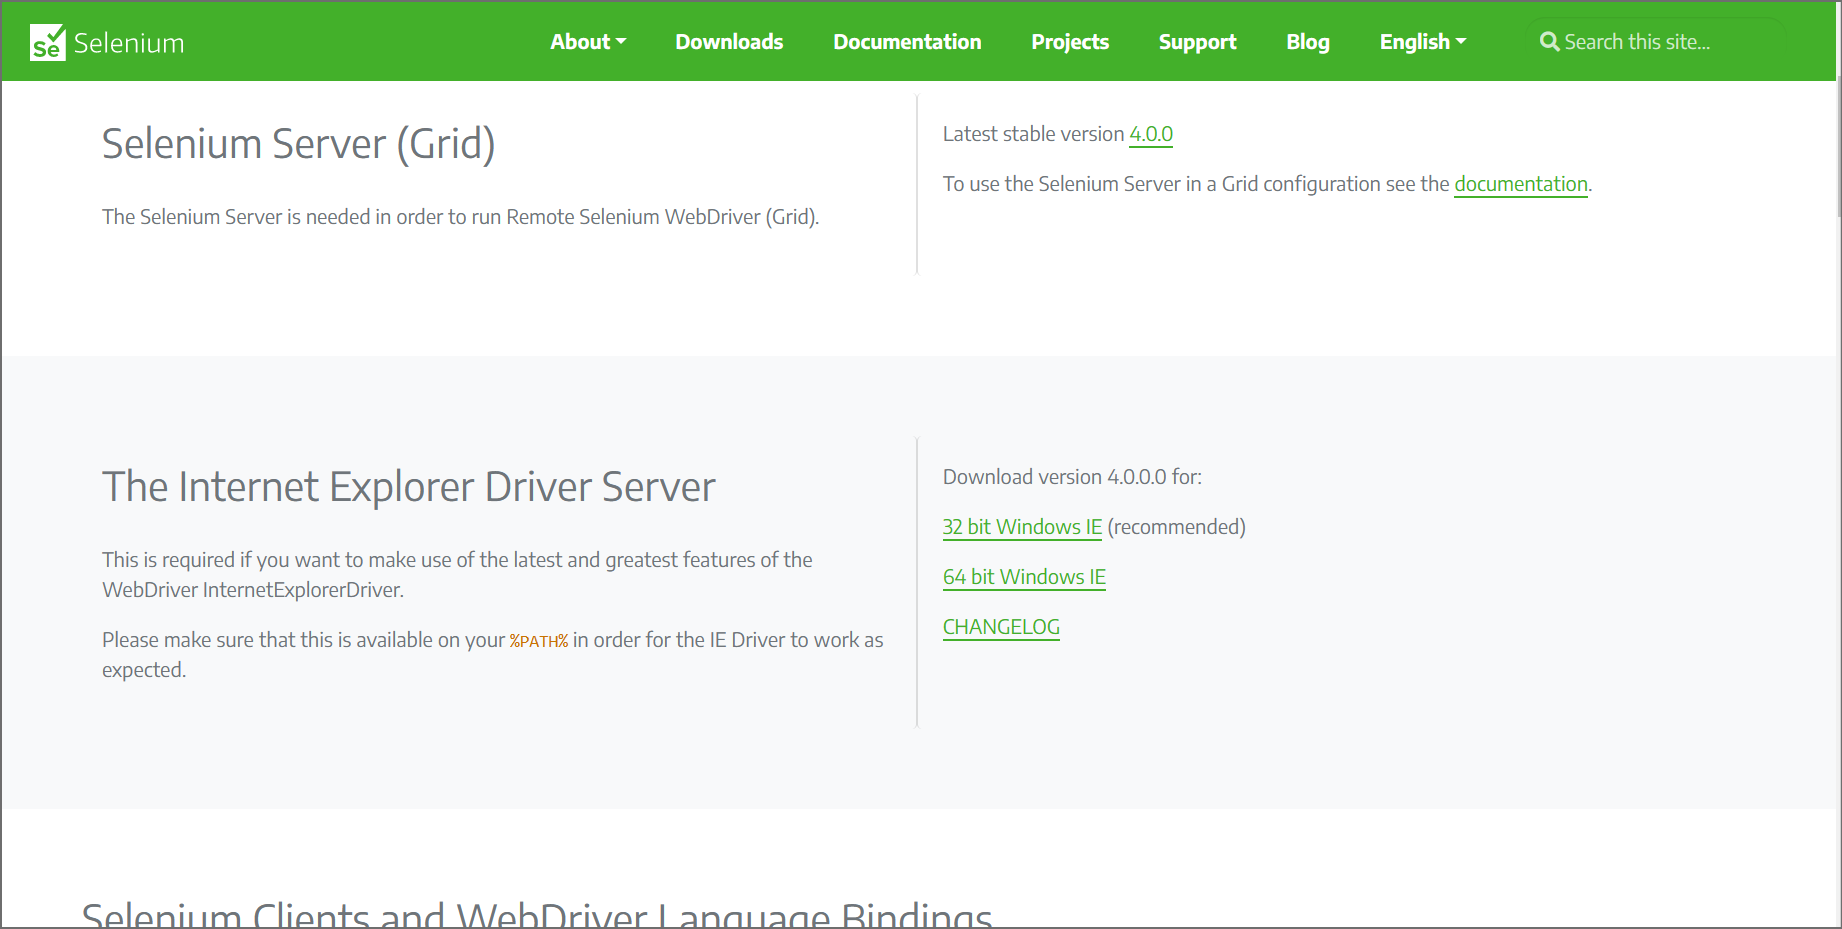 The IEDriver section of the Downloads page for Selenium